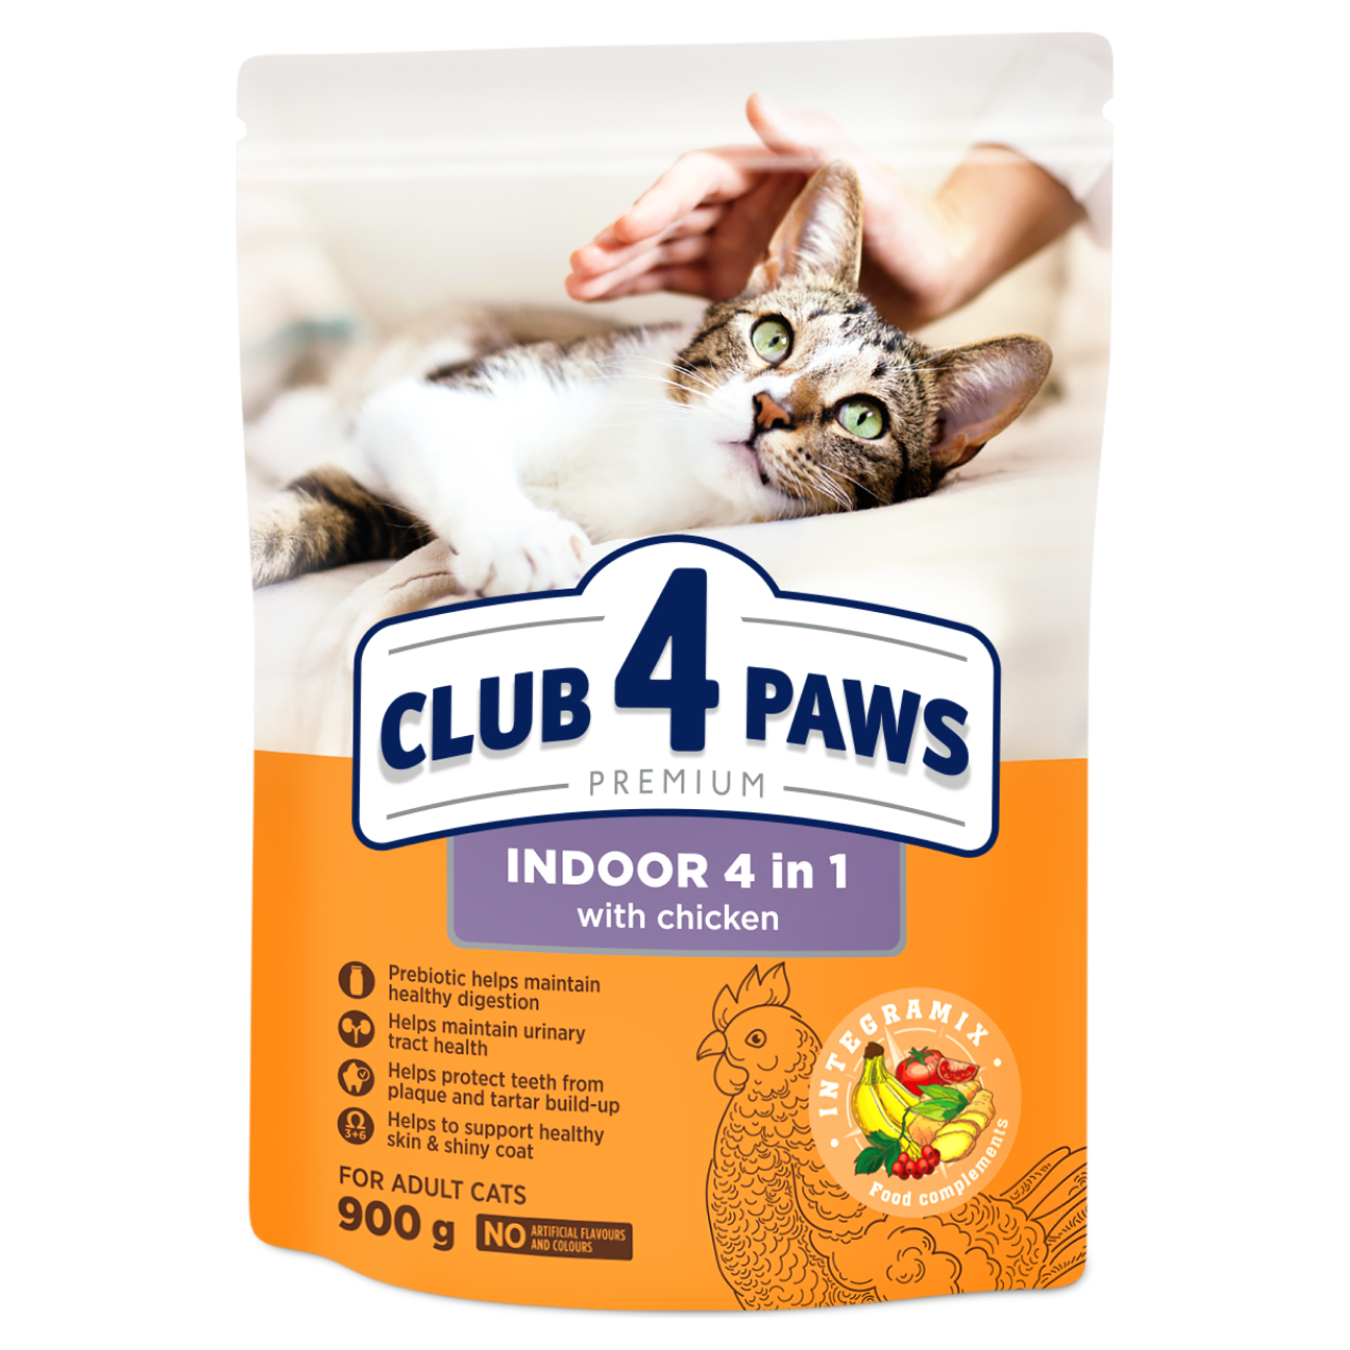 Club 4 Paws Premium indoor 4in1 for adult cats dry food 900g